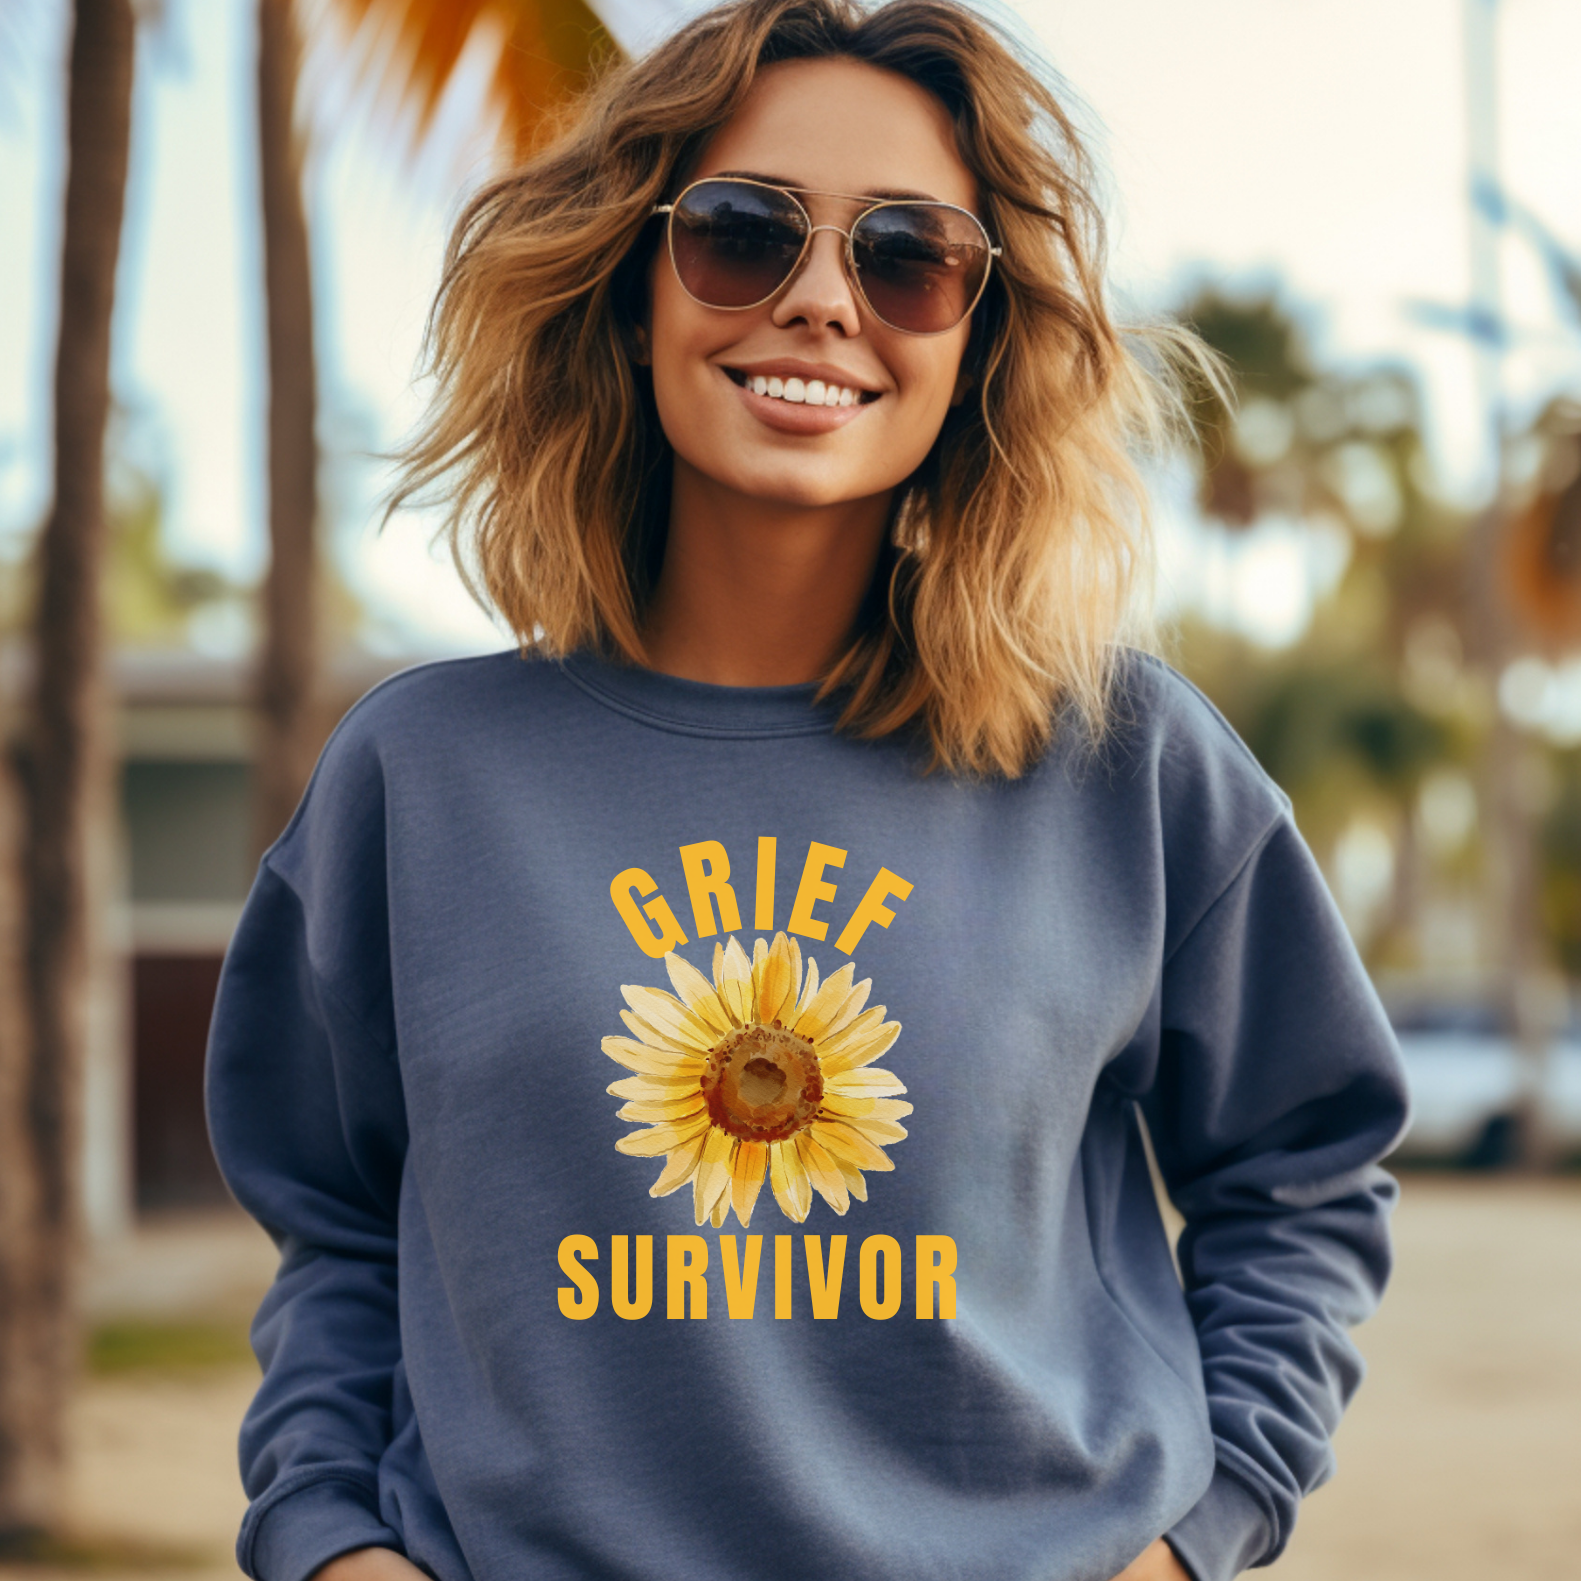 Blue Jean Comfort Colors Sweatshirt. Sometimes sharing your vulnerability can be cathartic, and allows you to share a bit of your journey, opening doors to thoughtful conversations, and understanding from others. 